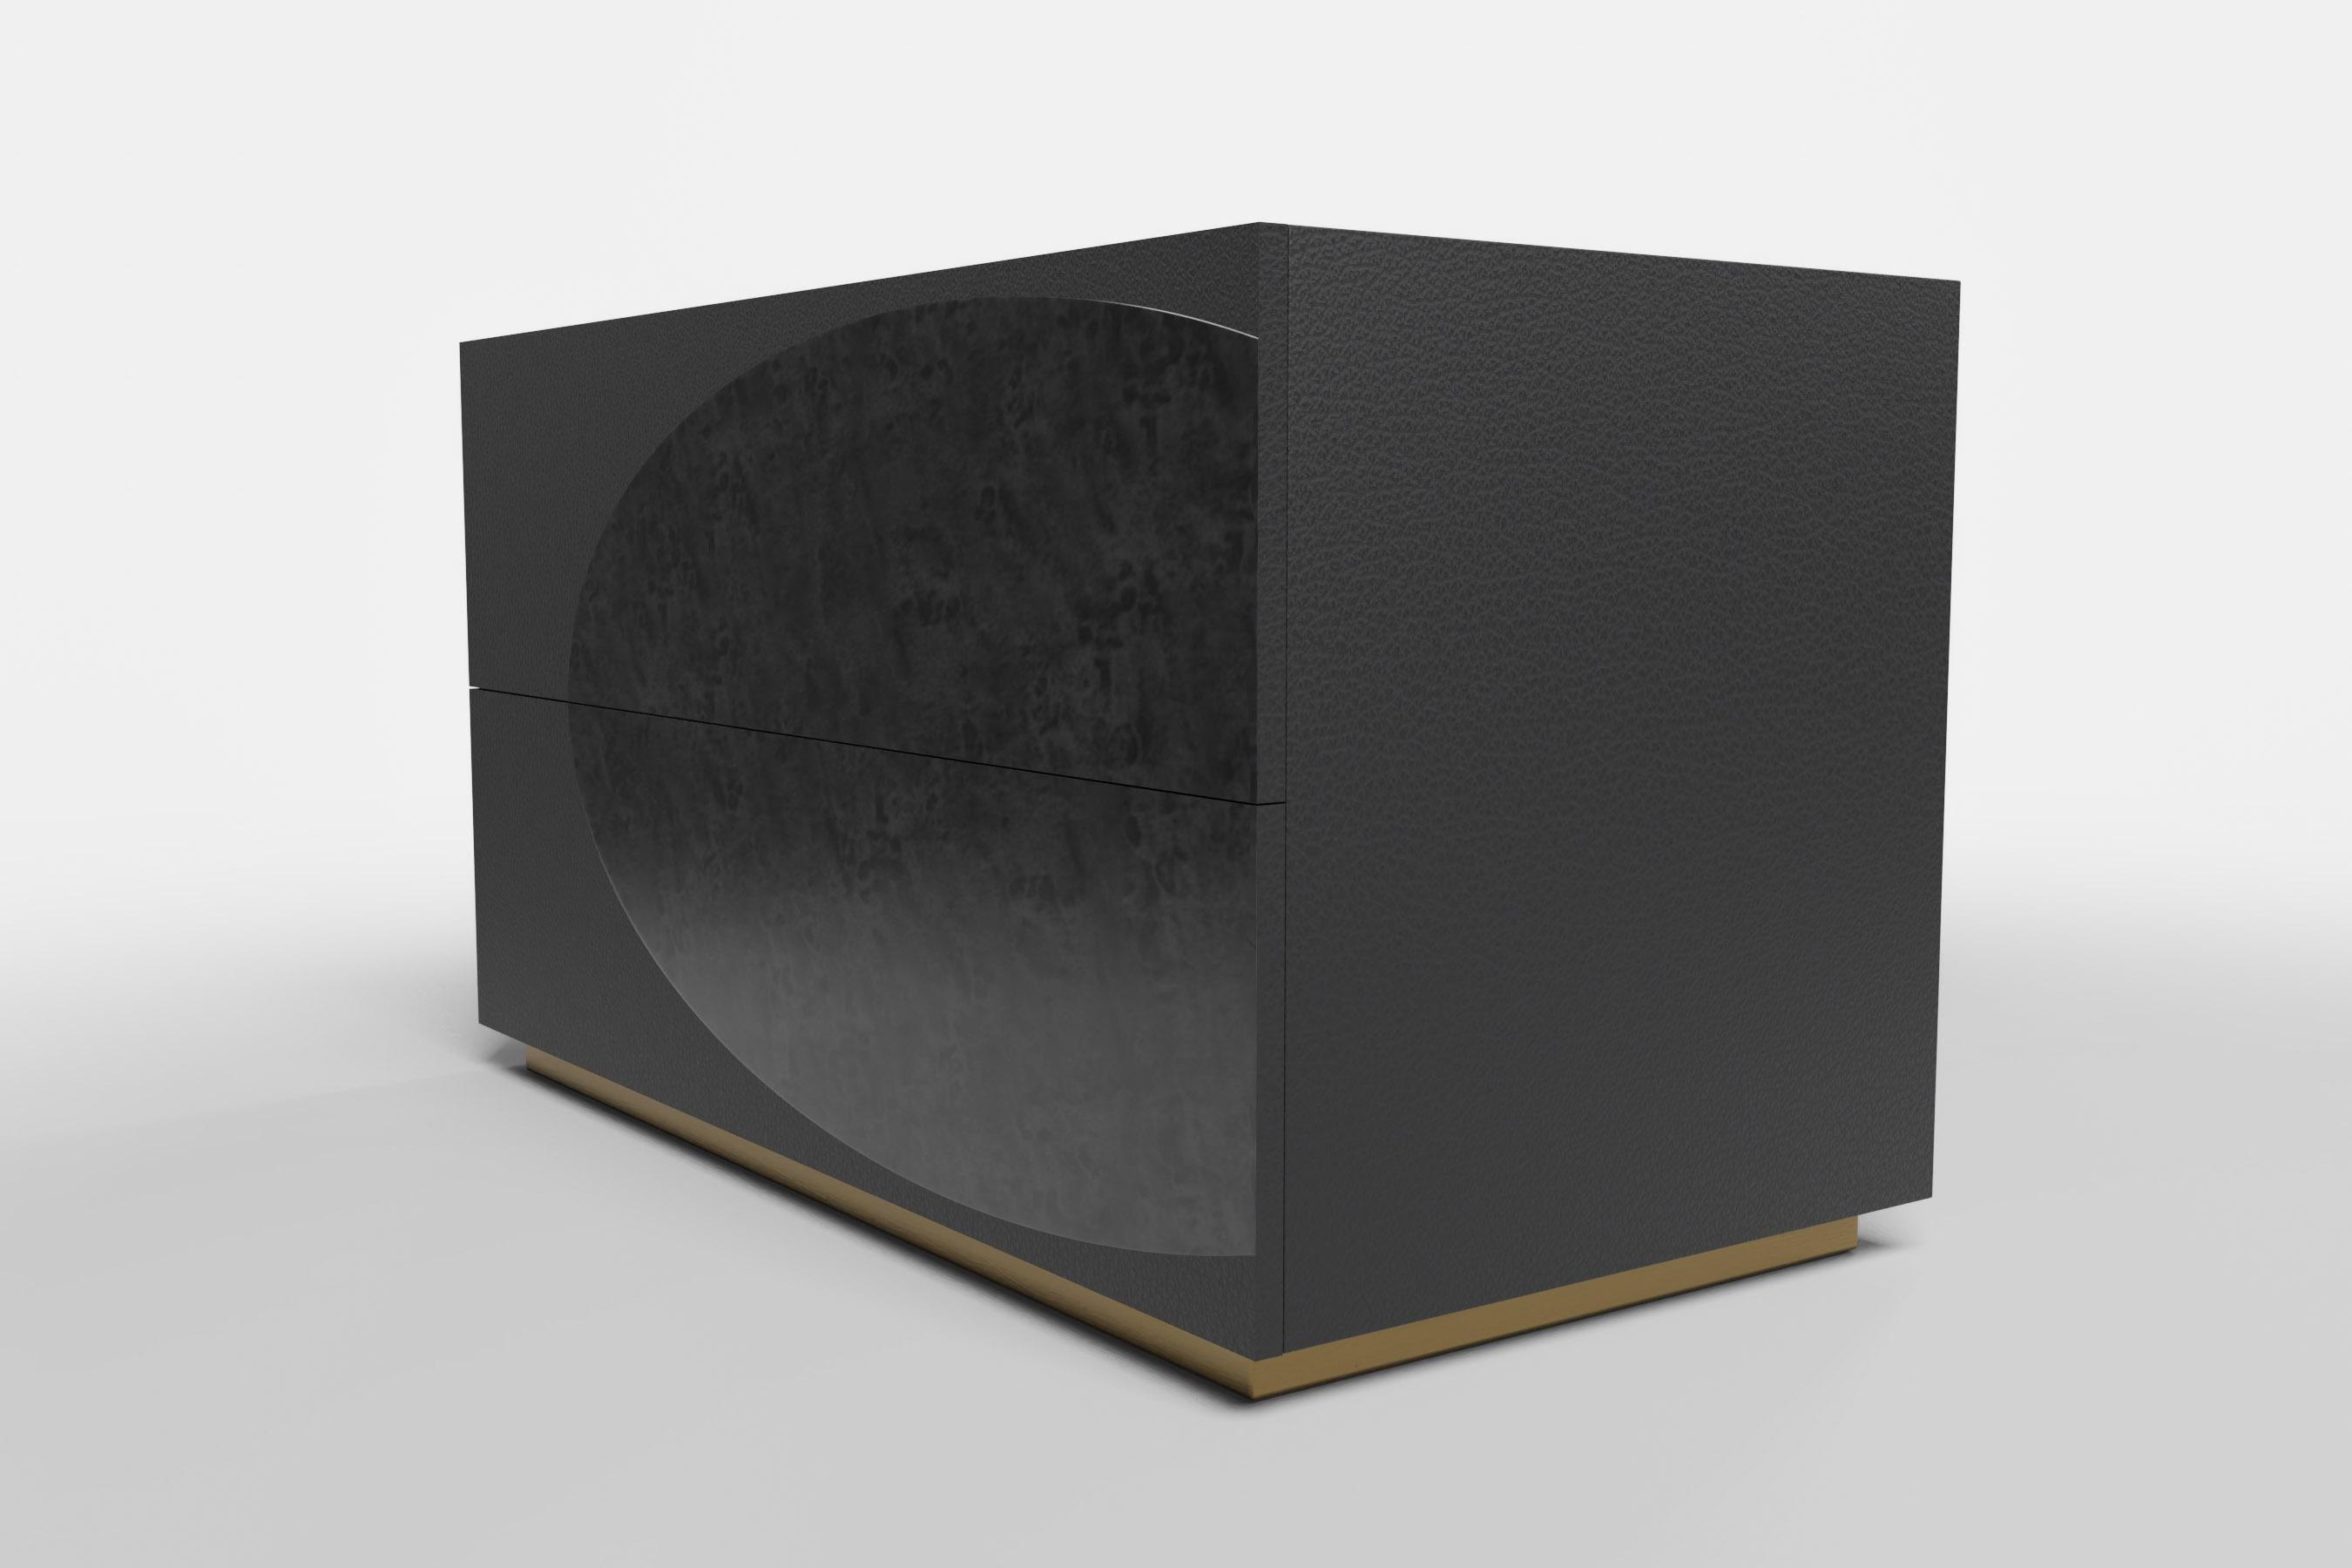 Lacquered LAGUNA NIGHTSTAND - Modern Design in Black Lacquer with a Dark Bronze Base